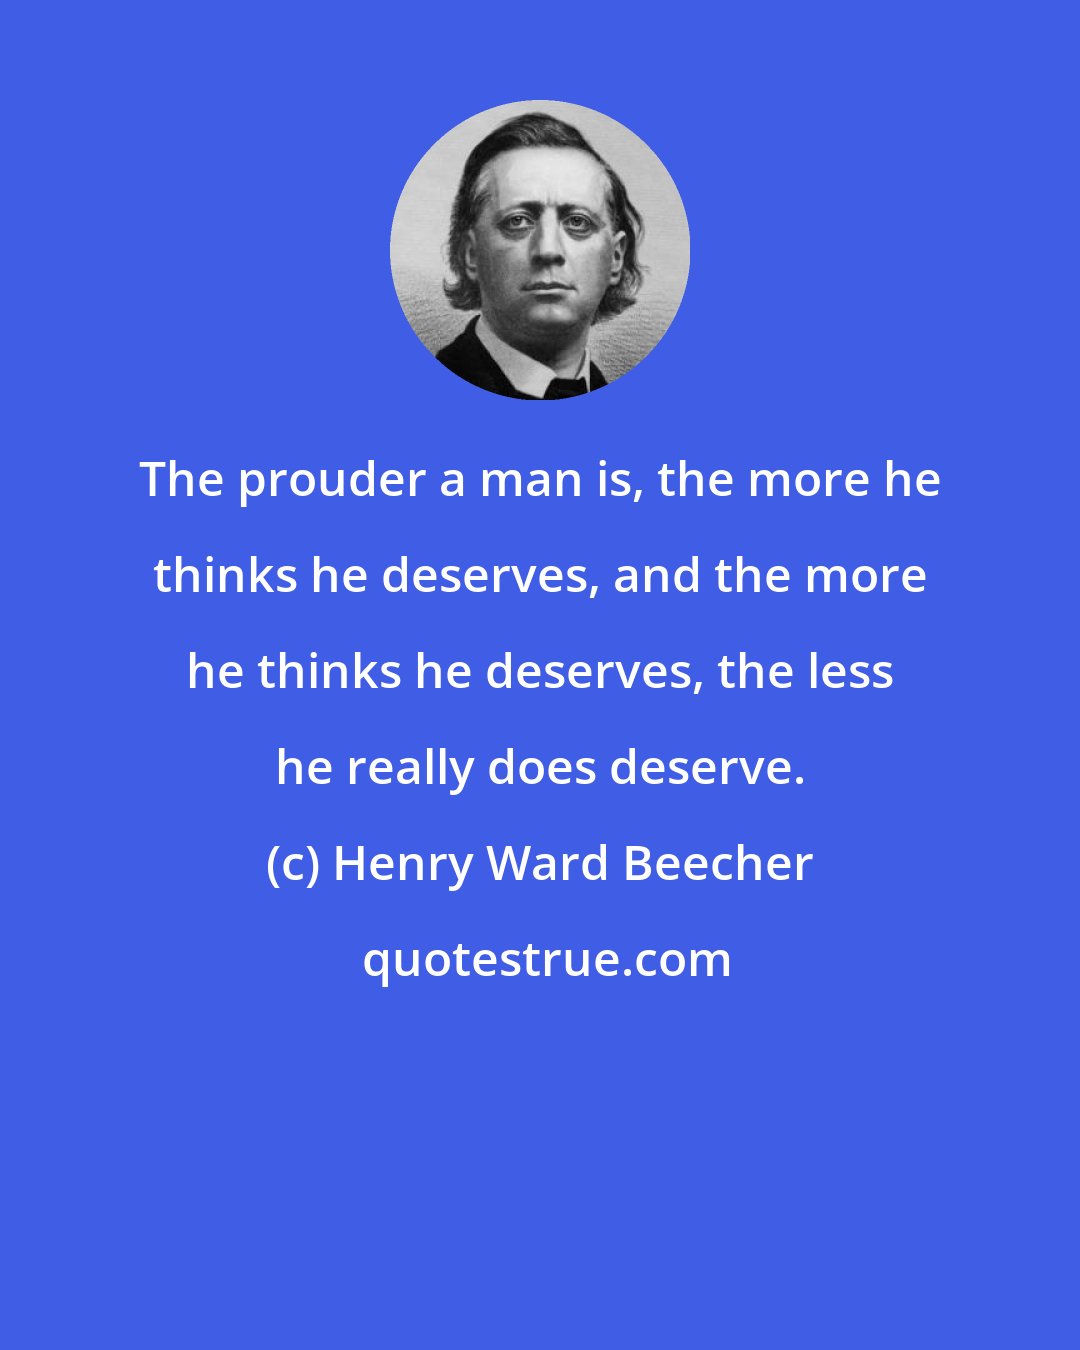 Henry Ward Beecher: The prouder a man is, the more he thinks he deserves, and the more he thinks he deserves, the less he really does deserve.